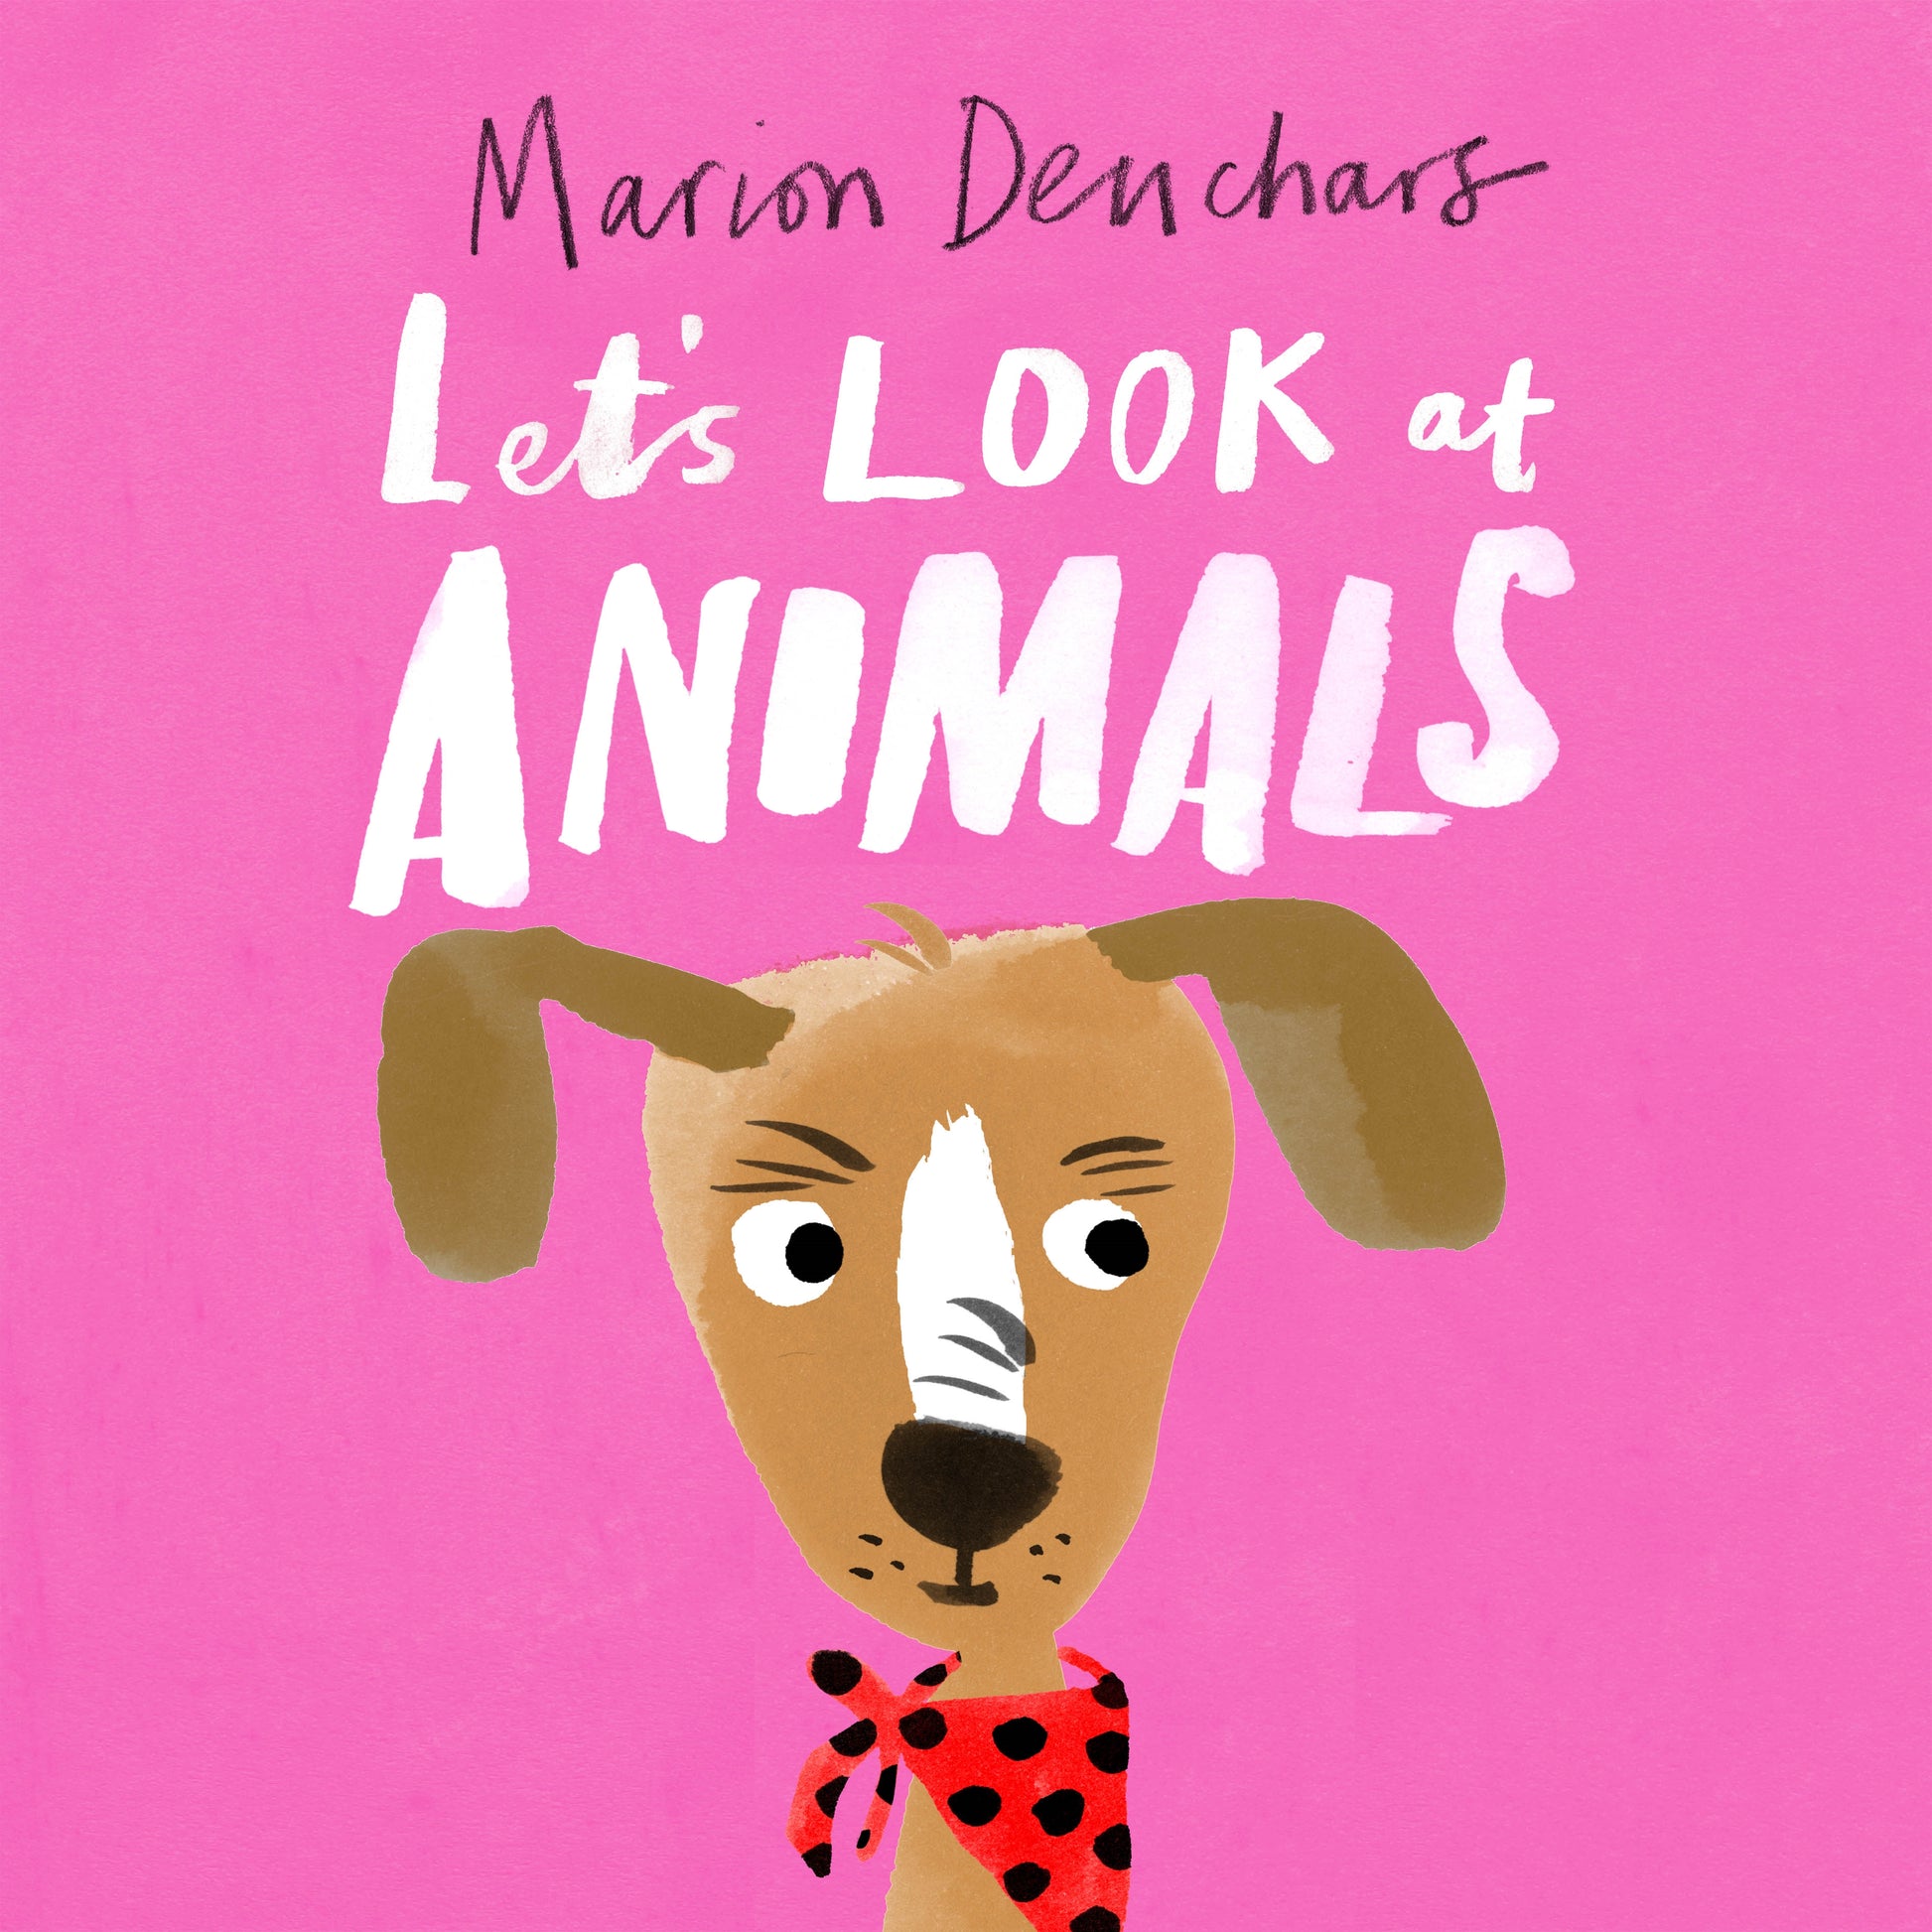 Let's Look at... Animals by Marion Deuchars